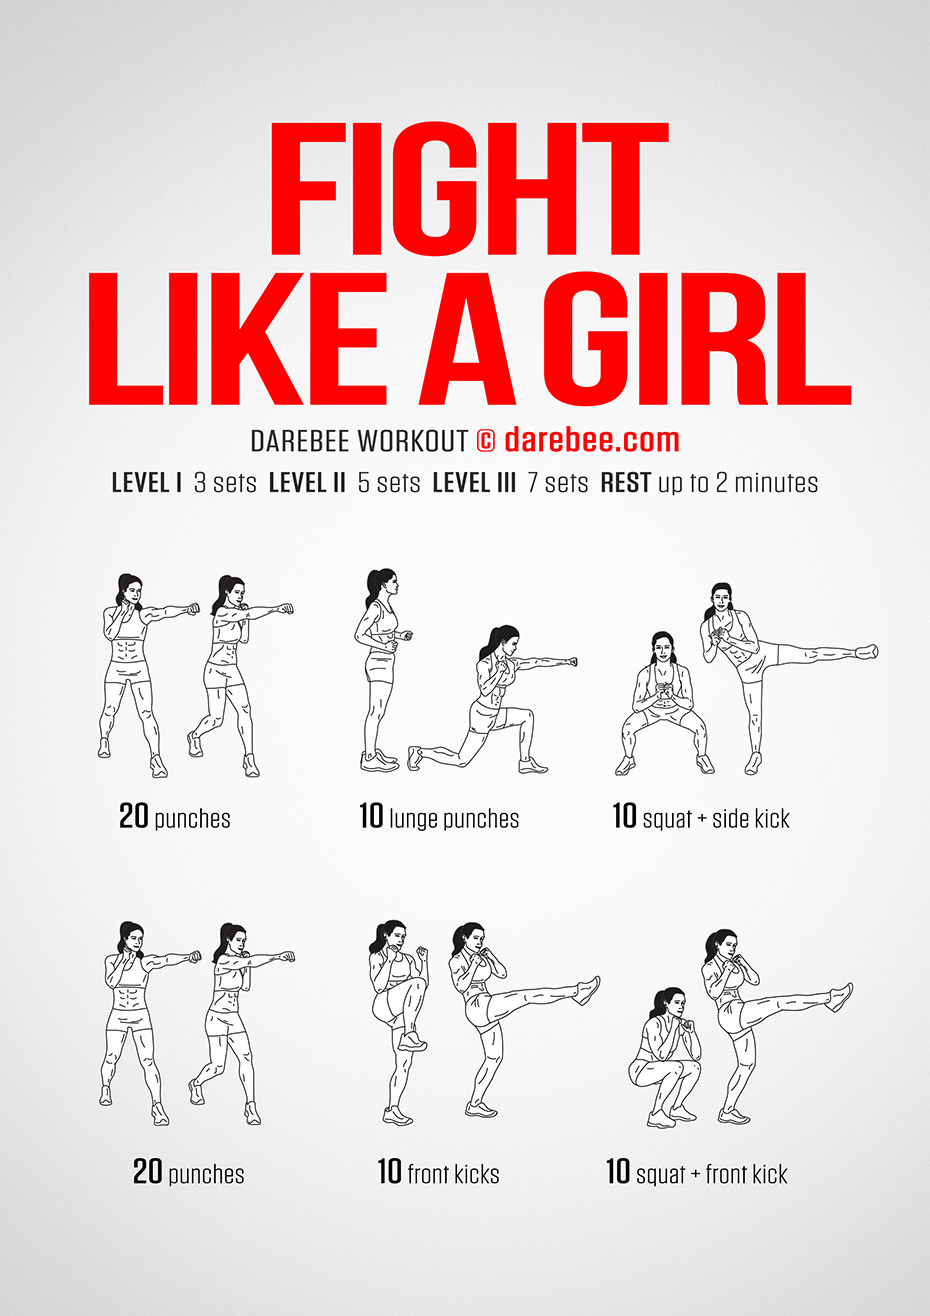 The fight like a girl workout from Darebee